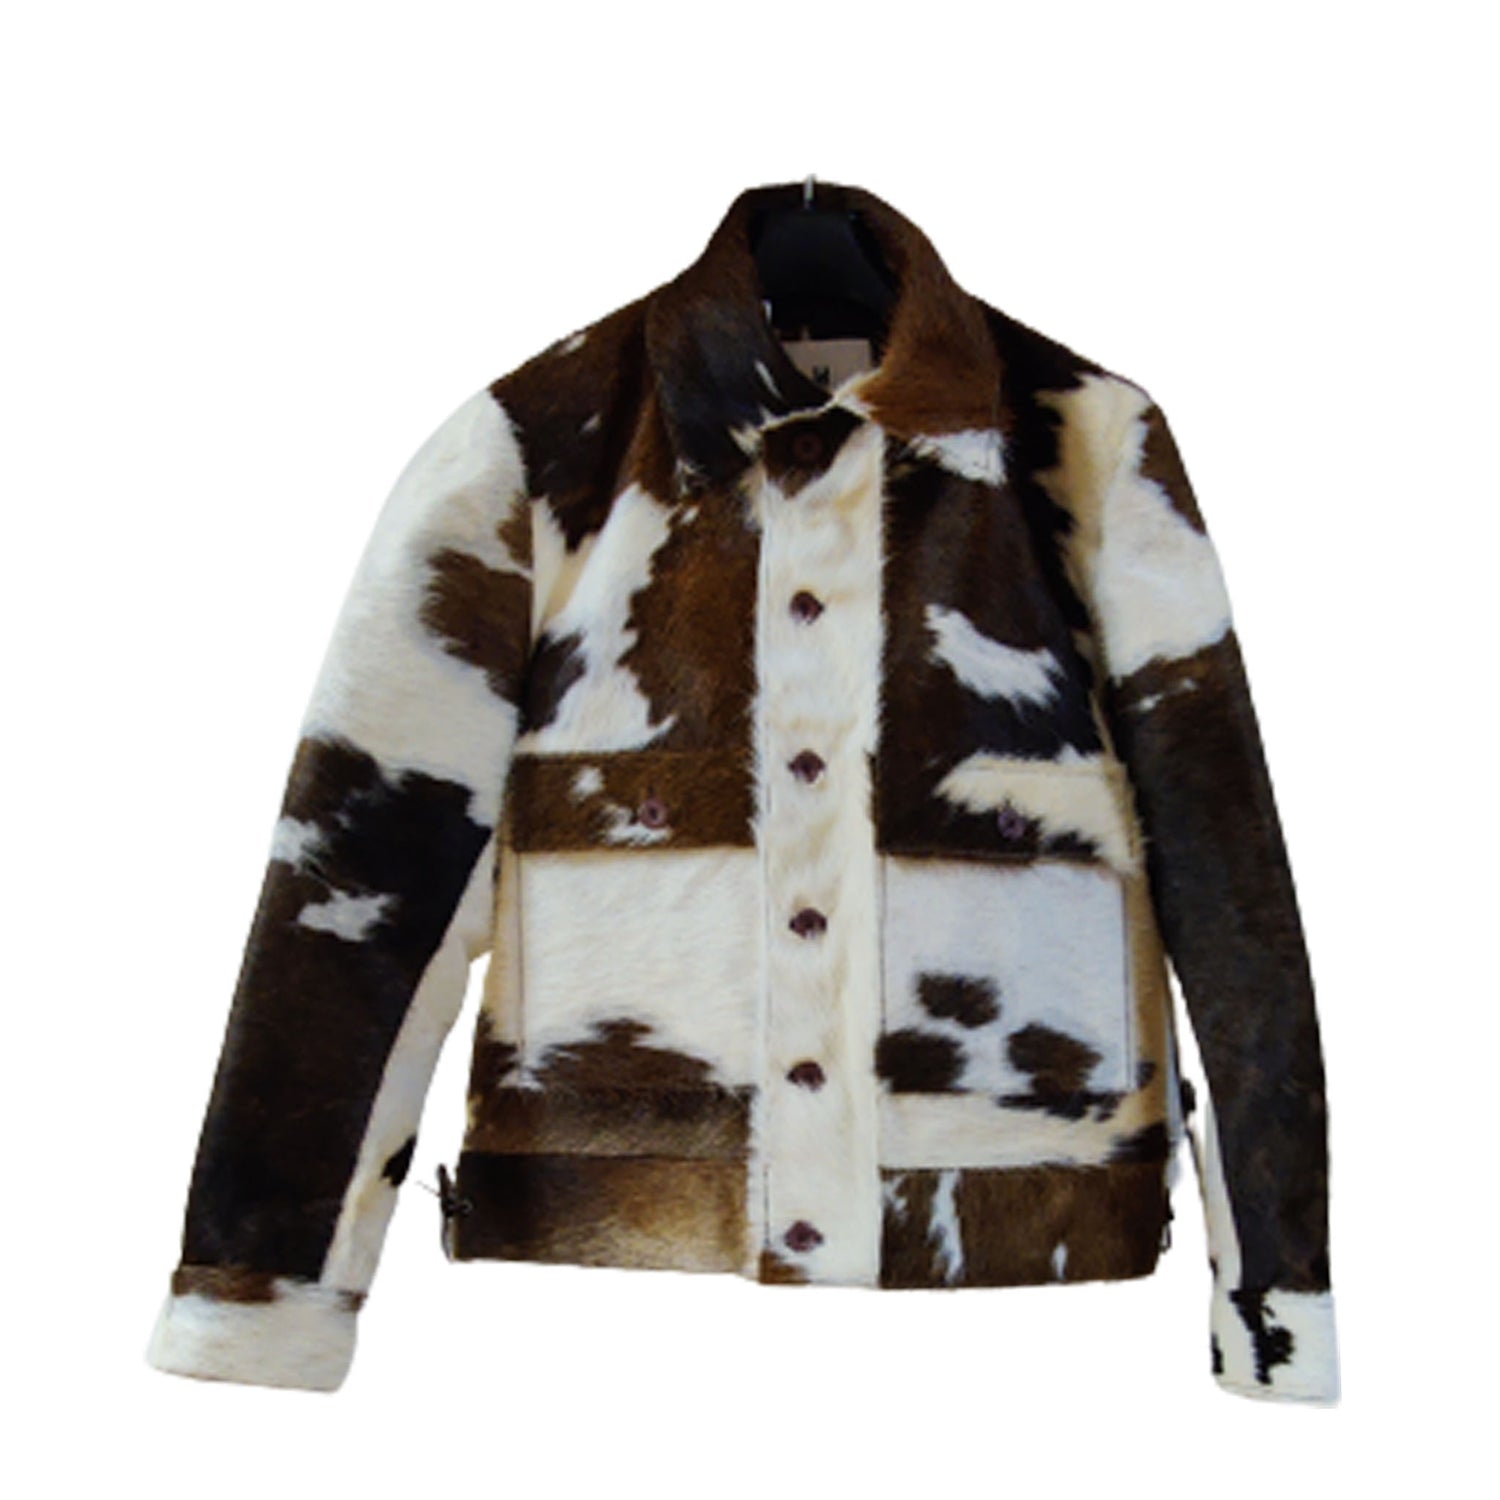 Printed Fur and Leather Jacket